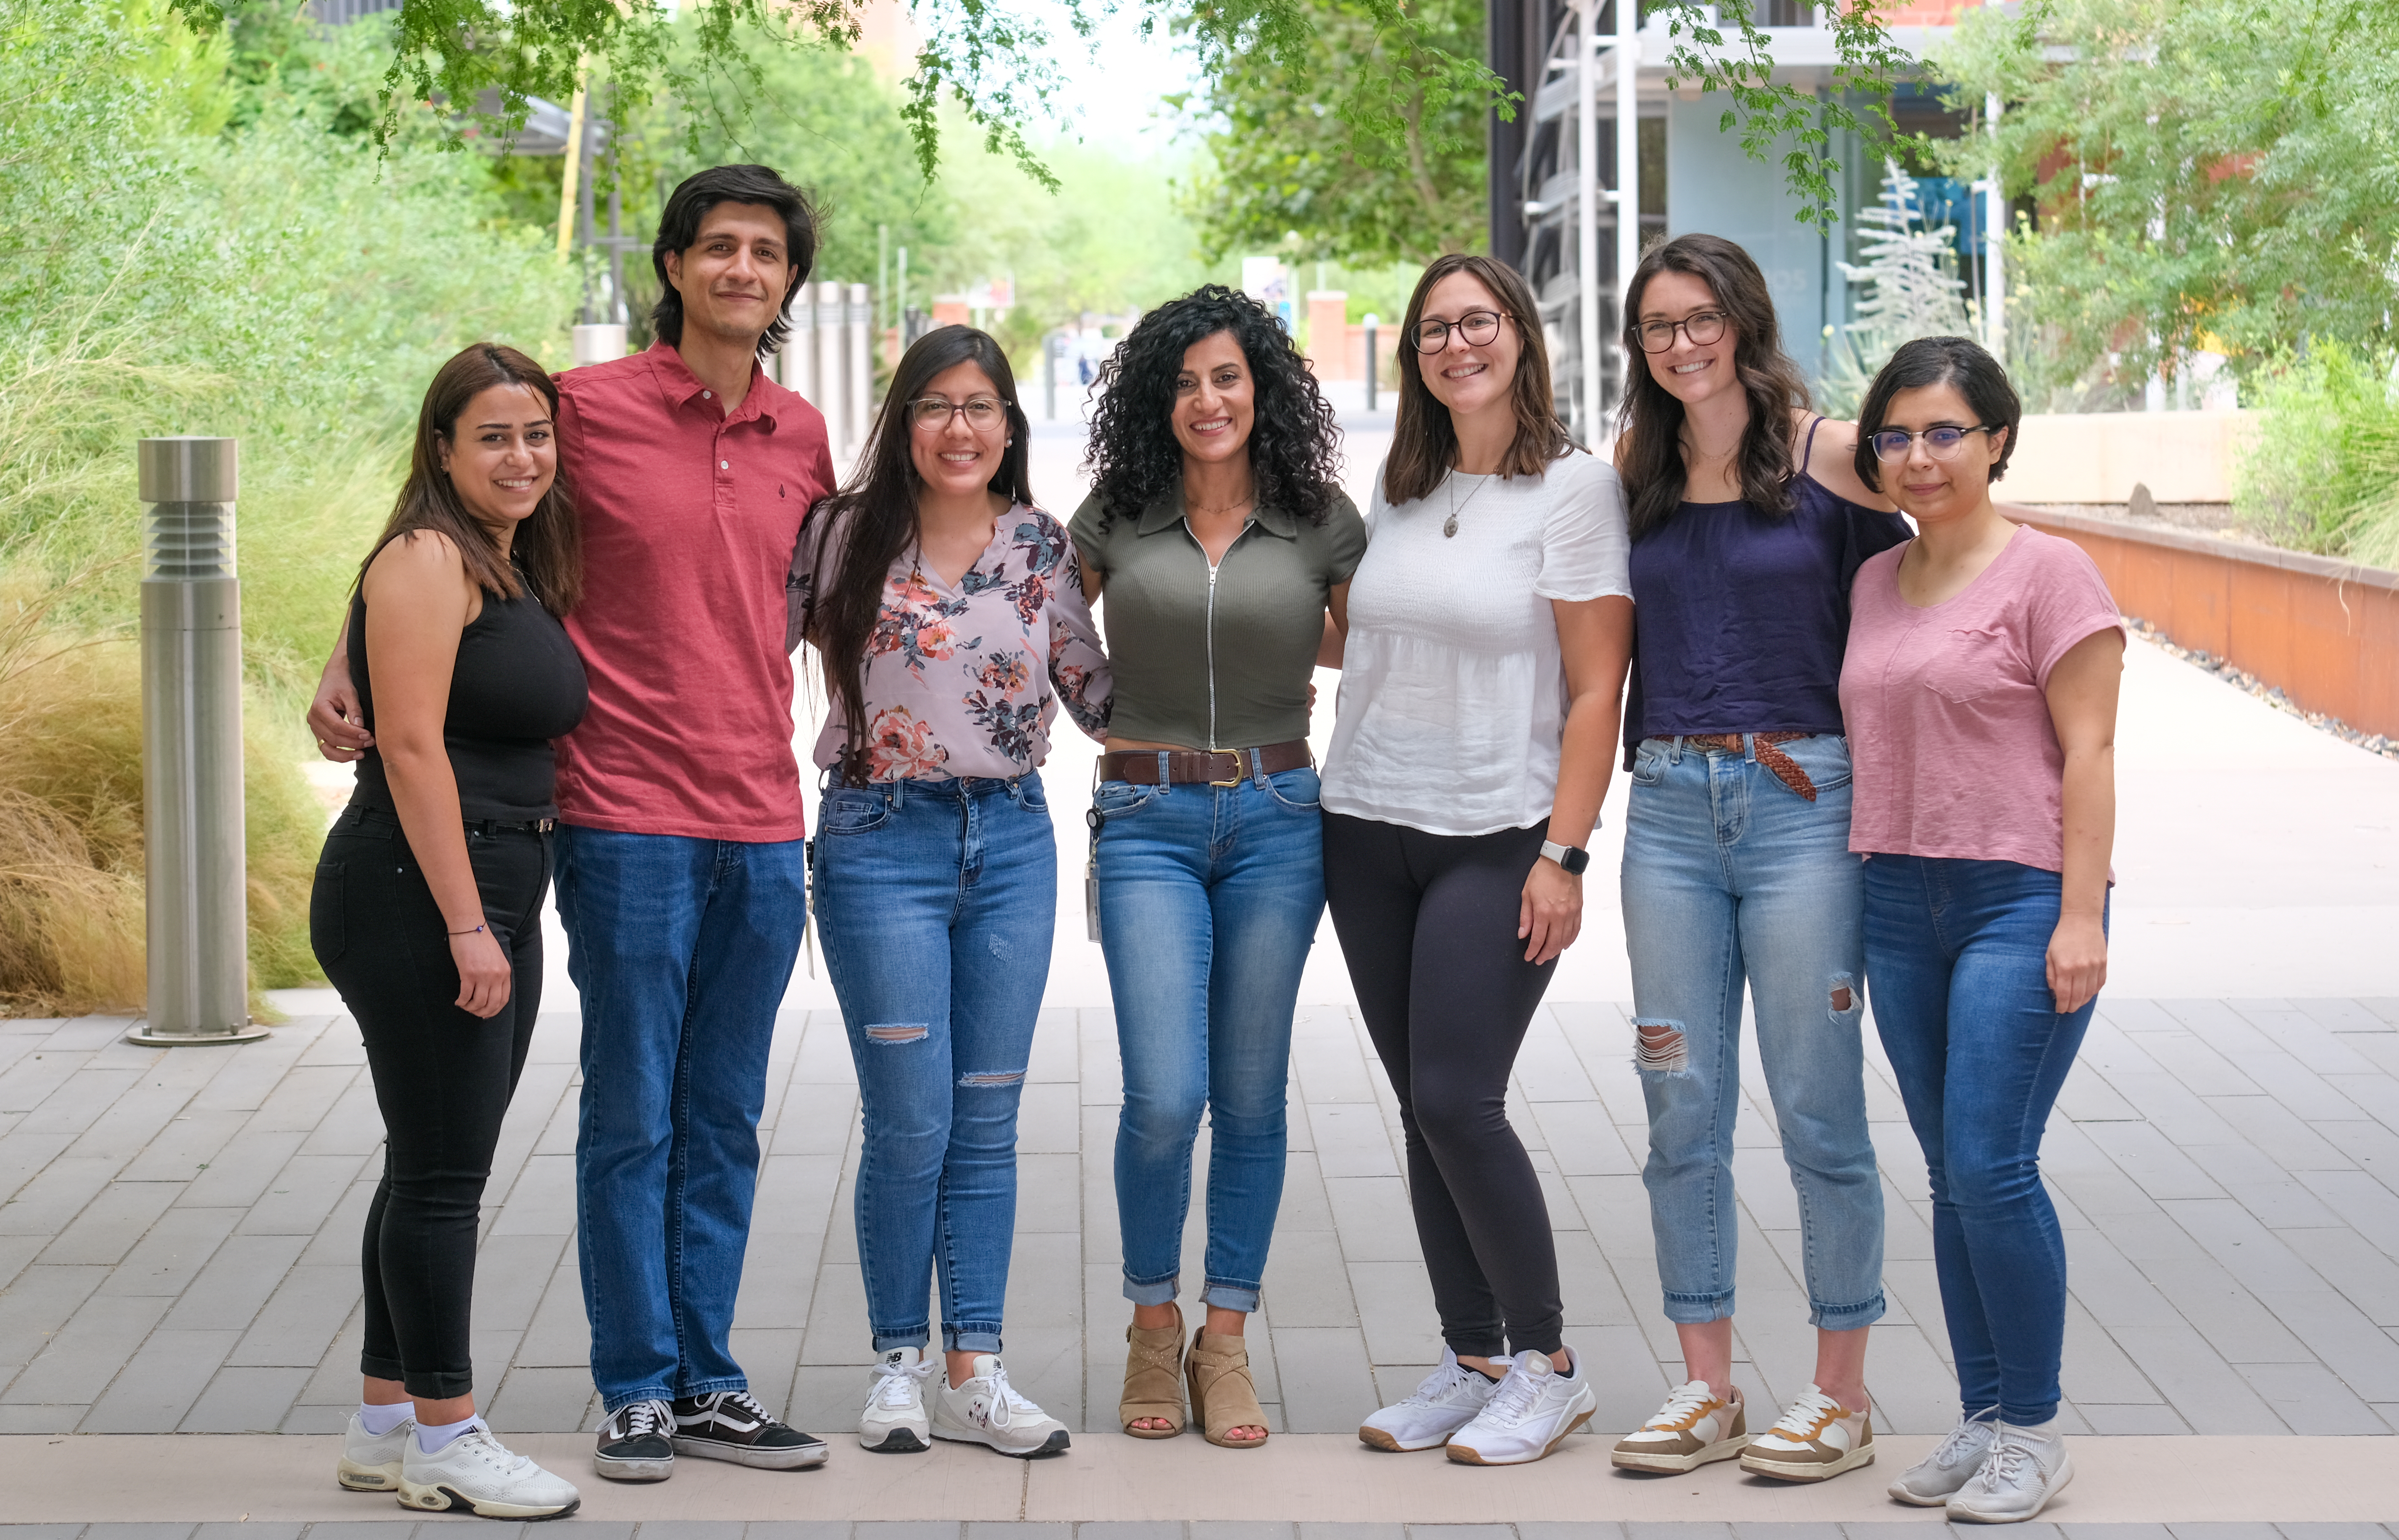 Malak Lfaily and her lab of graduate students in the Environmental Science department at the University of Arizona